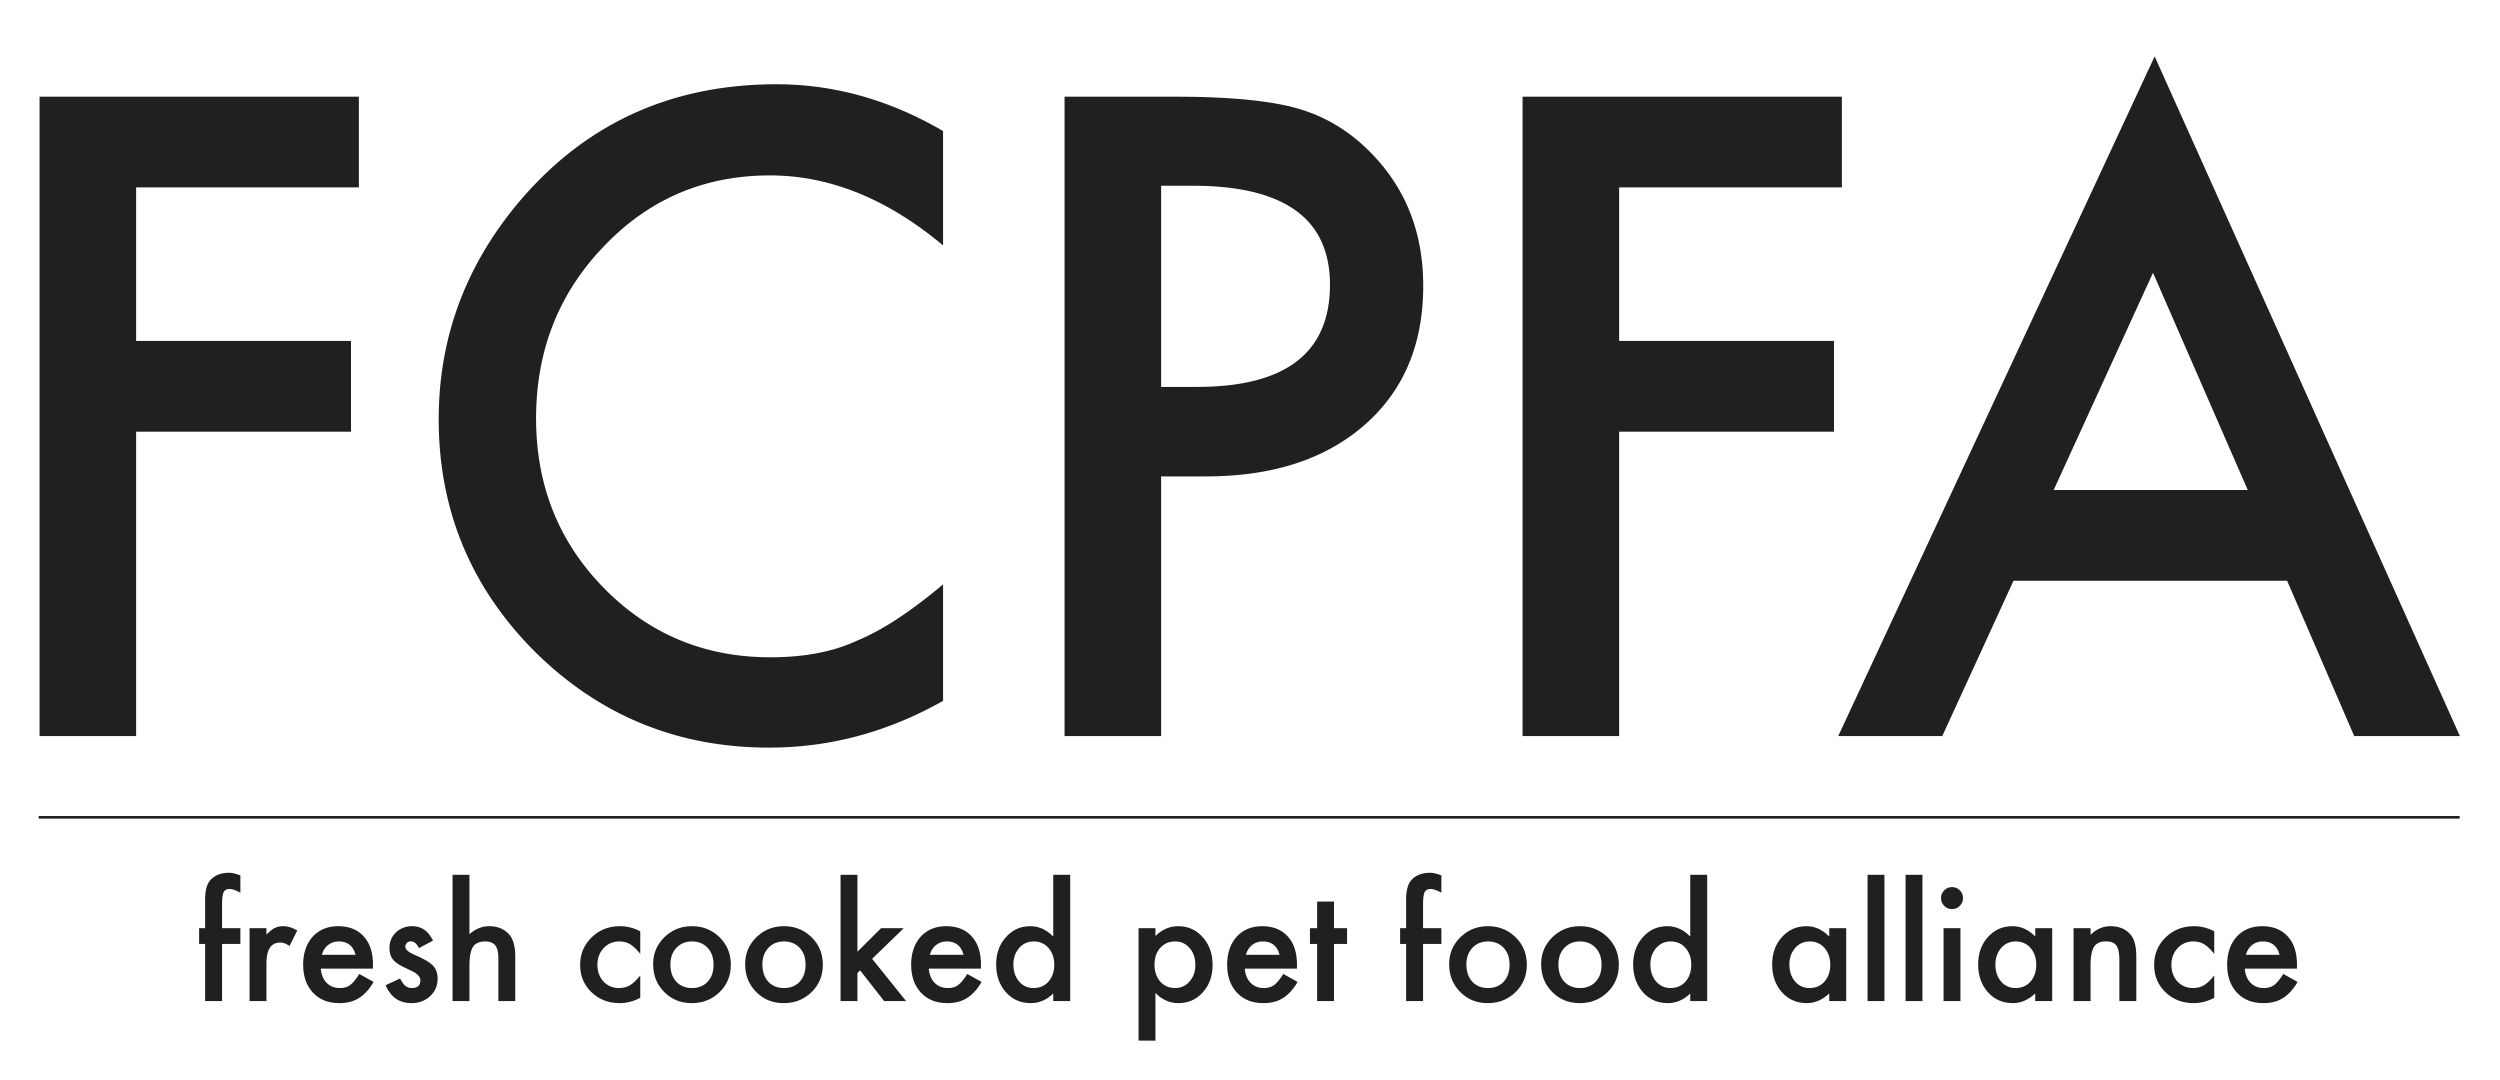 Fresh Cooked Pet Food Alliance